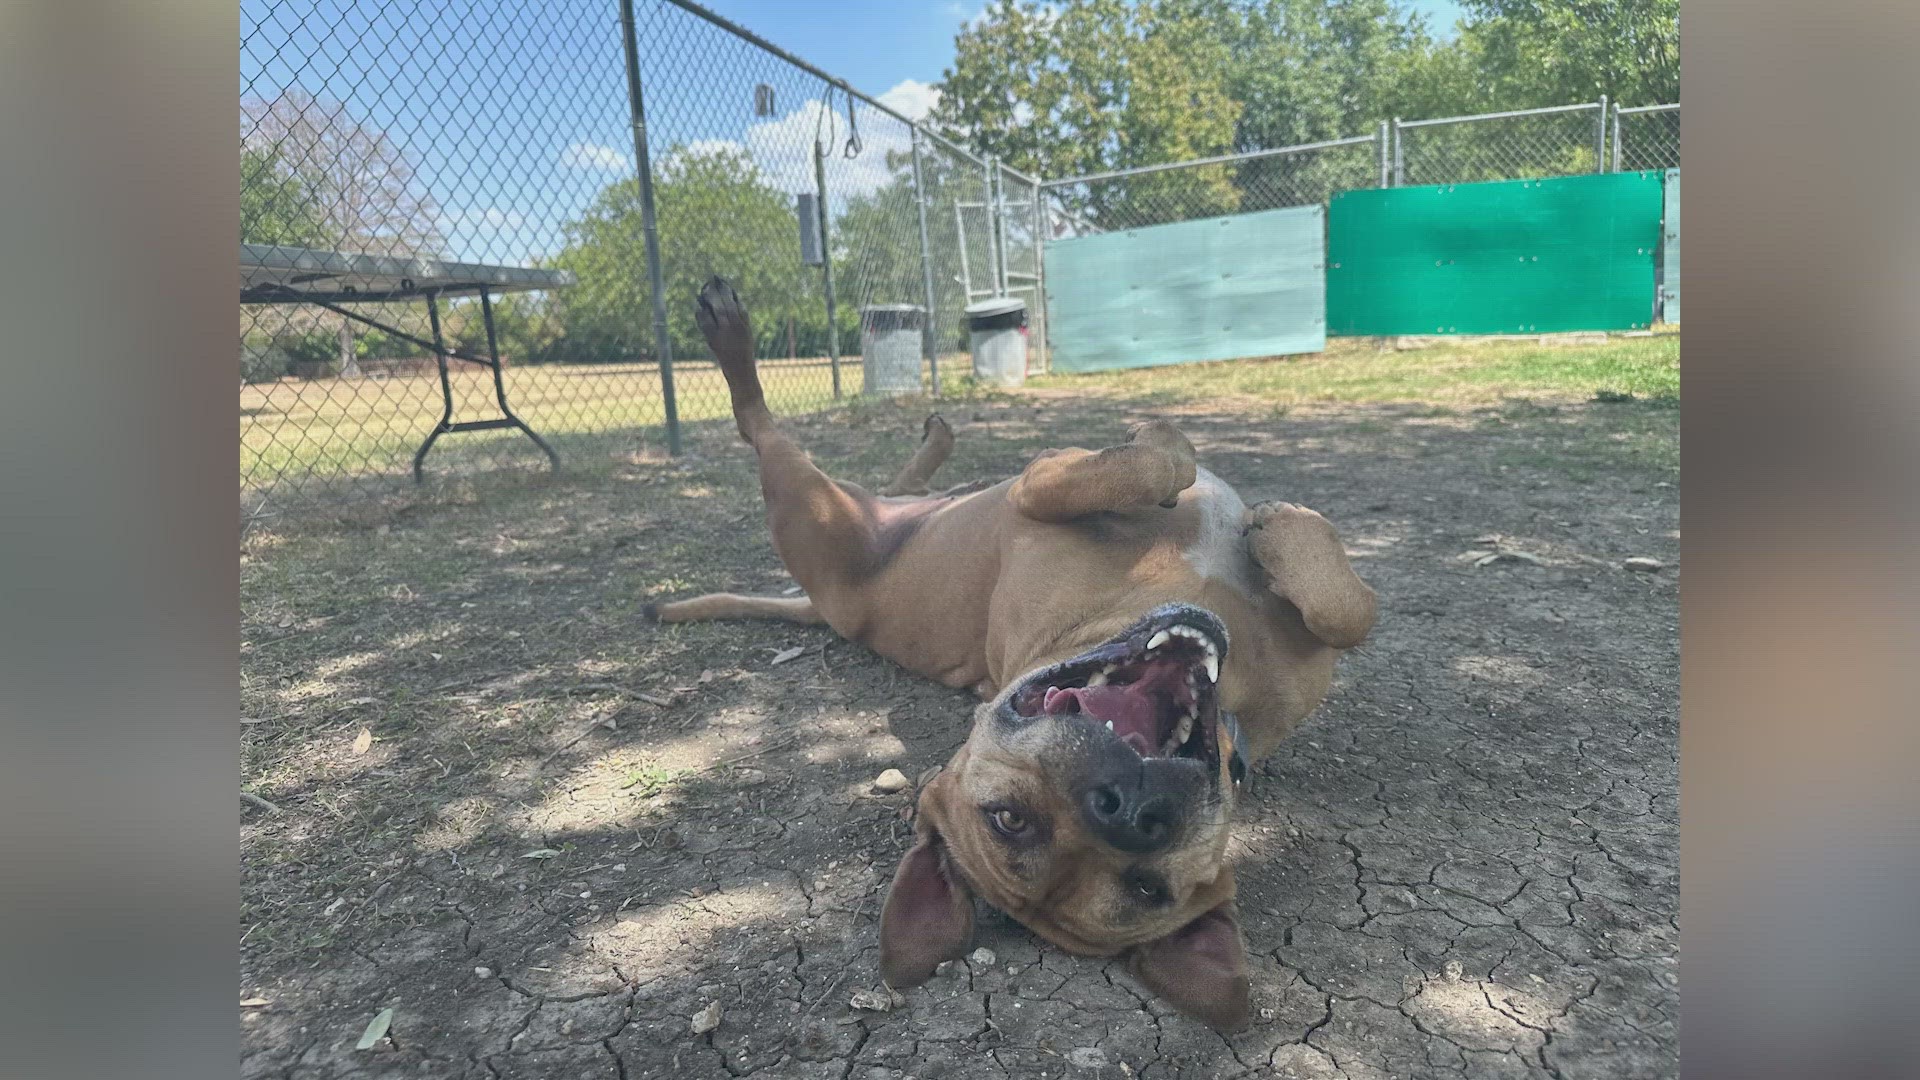 This pitbull and shepherd mix has been at the Animal Defense League on Nacogdoches since 2018.